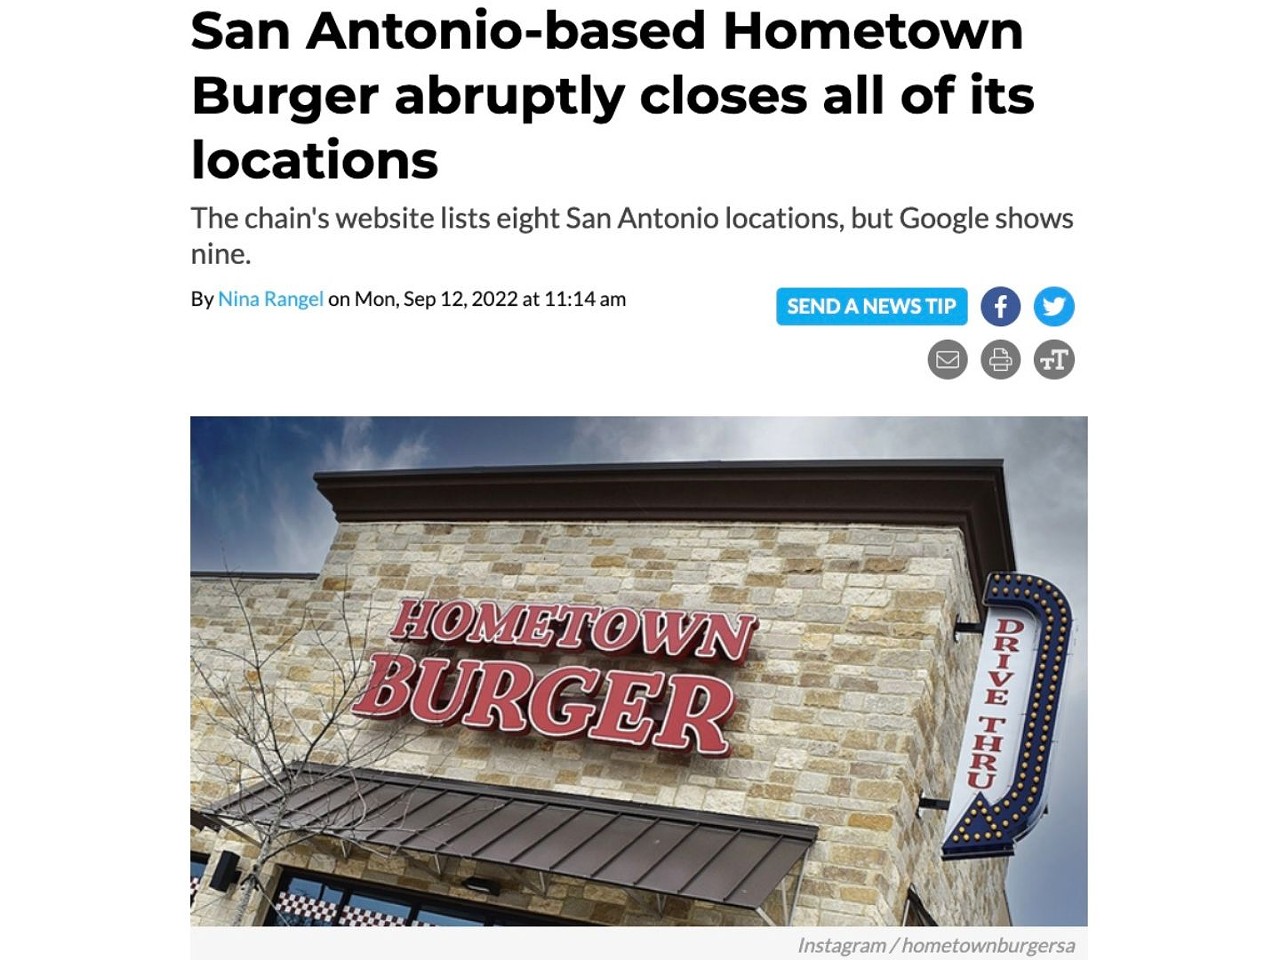 15. San Antonio-based Hometown Burger abruptly closes all of its locations